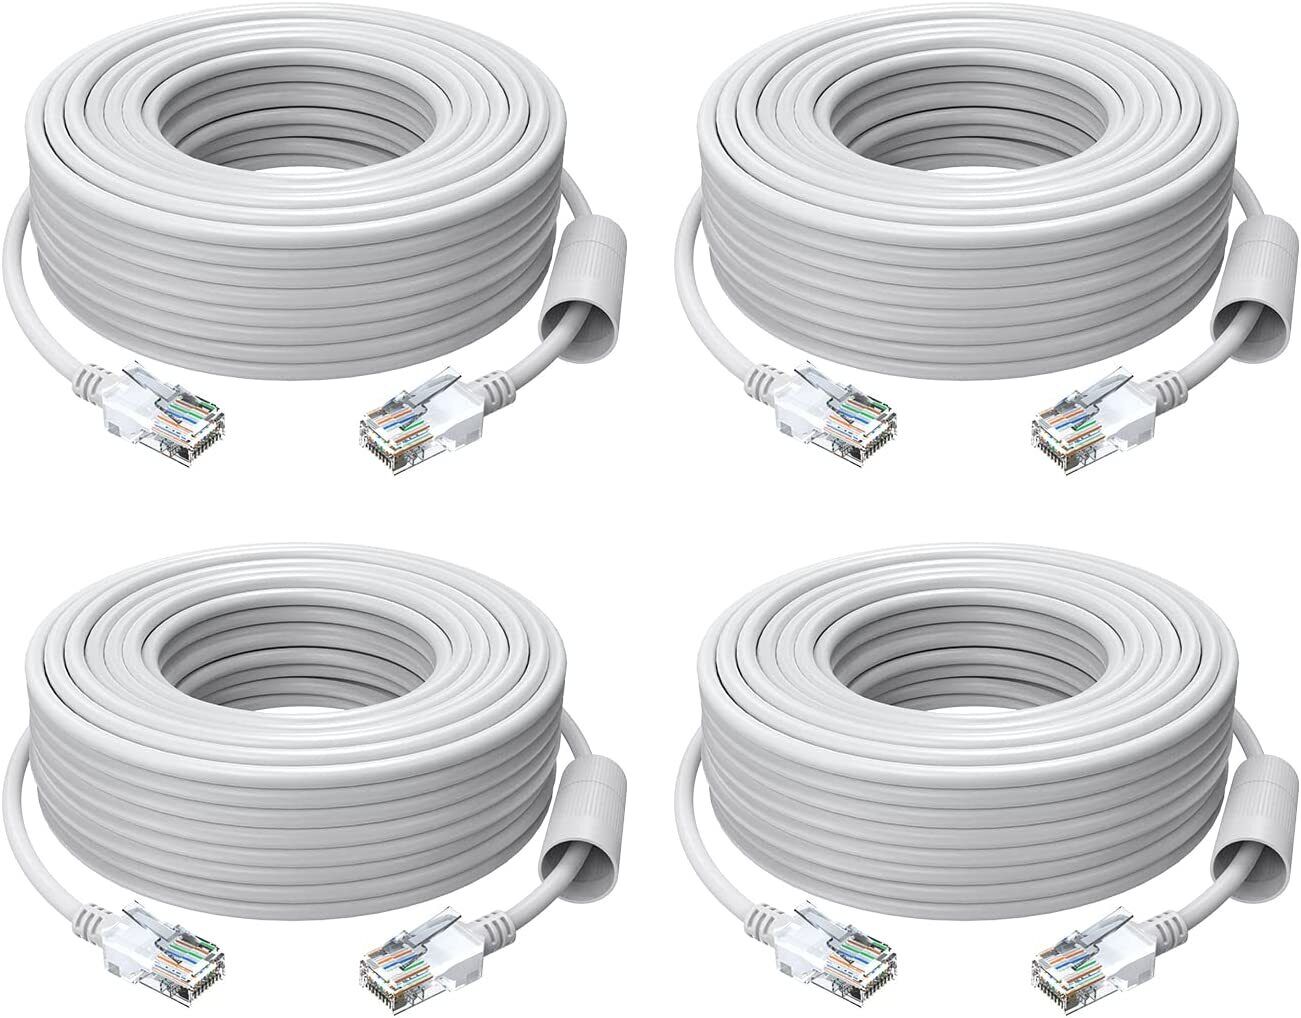 ZOSI 4-Pack 100ft Cat5e Ethernet Security Cameras RJ45 POE Cable Network Wire